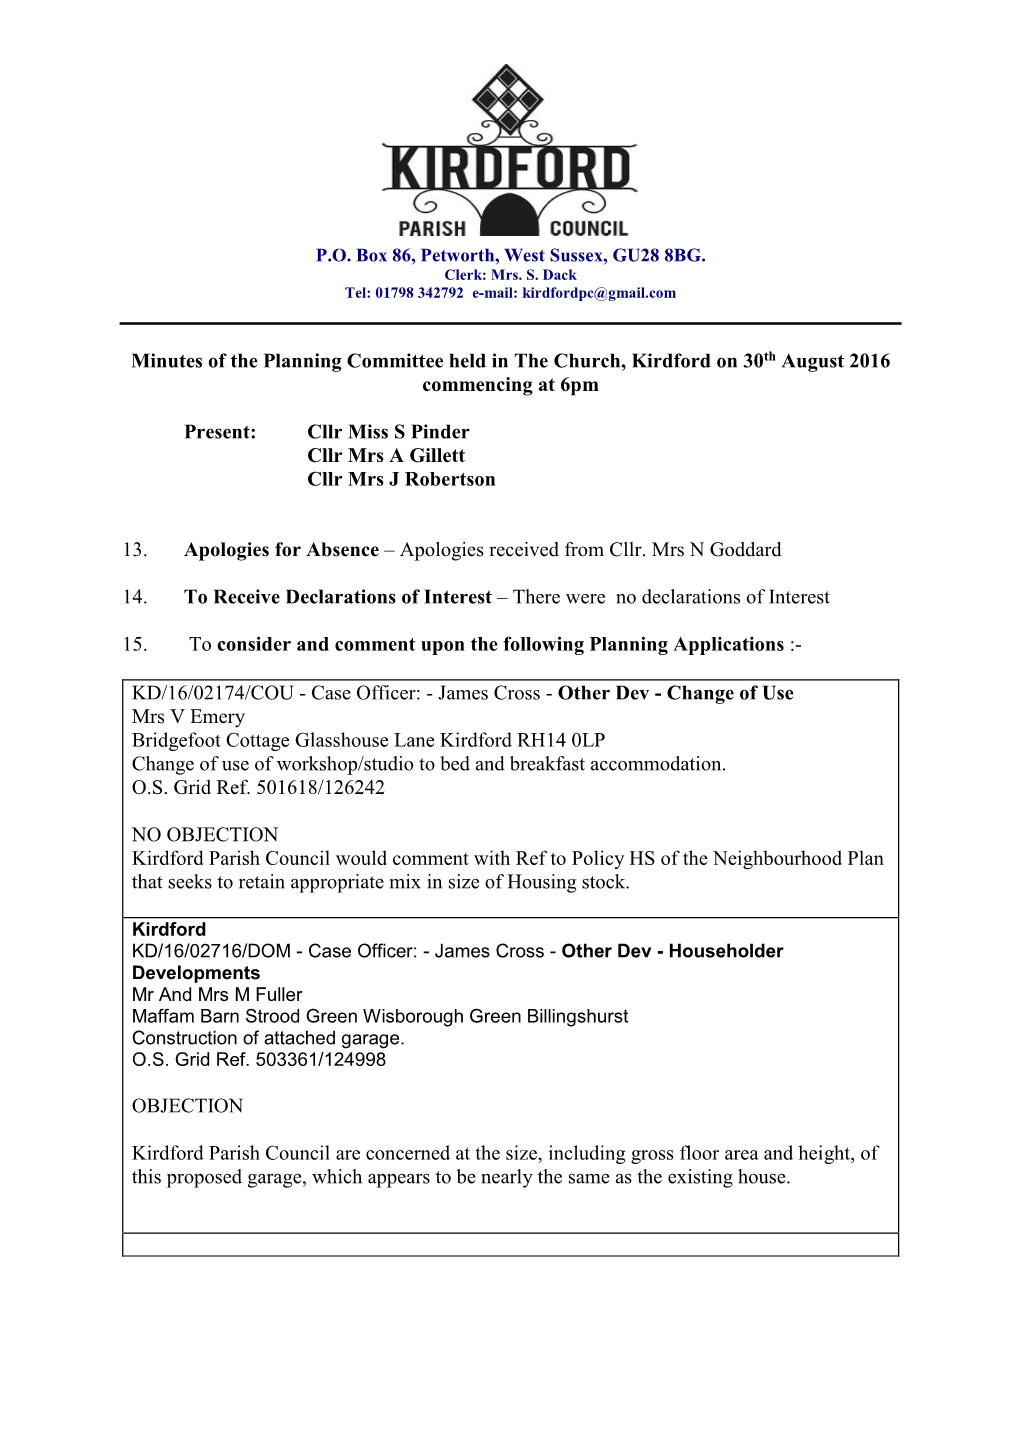 Minutes of the Planning Committee Held in the Church, Kirdford on 30Th August 2016 Commencing at 6Pm